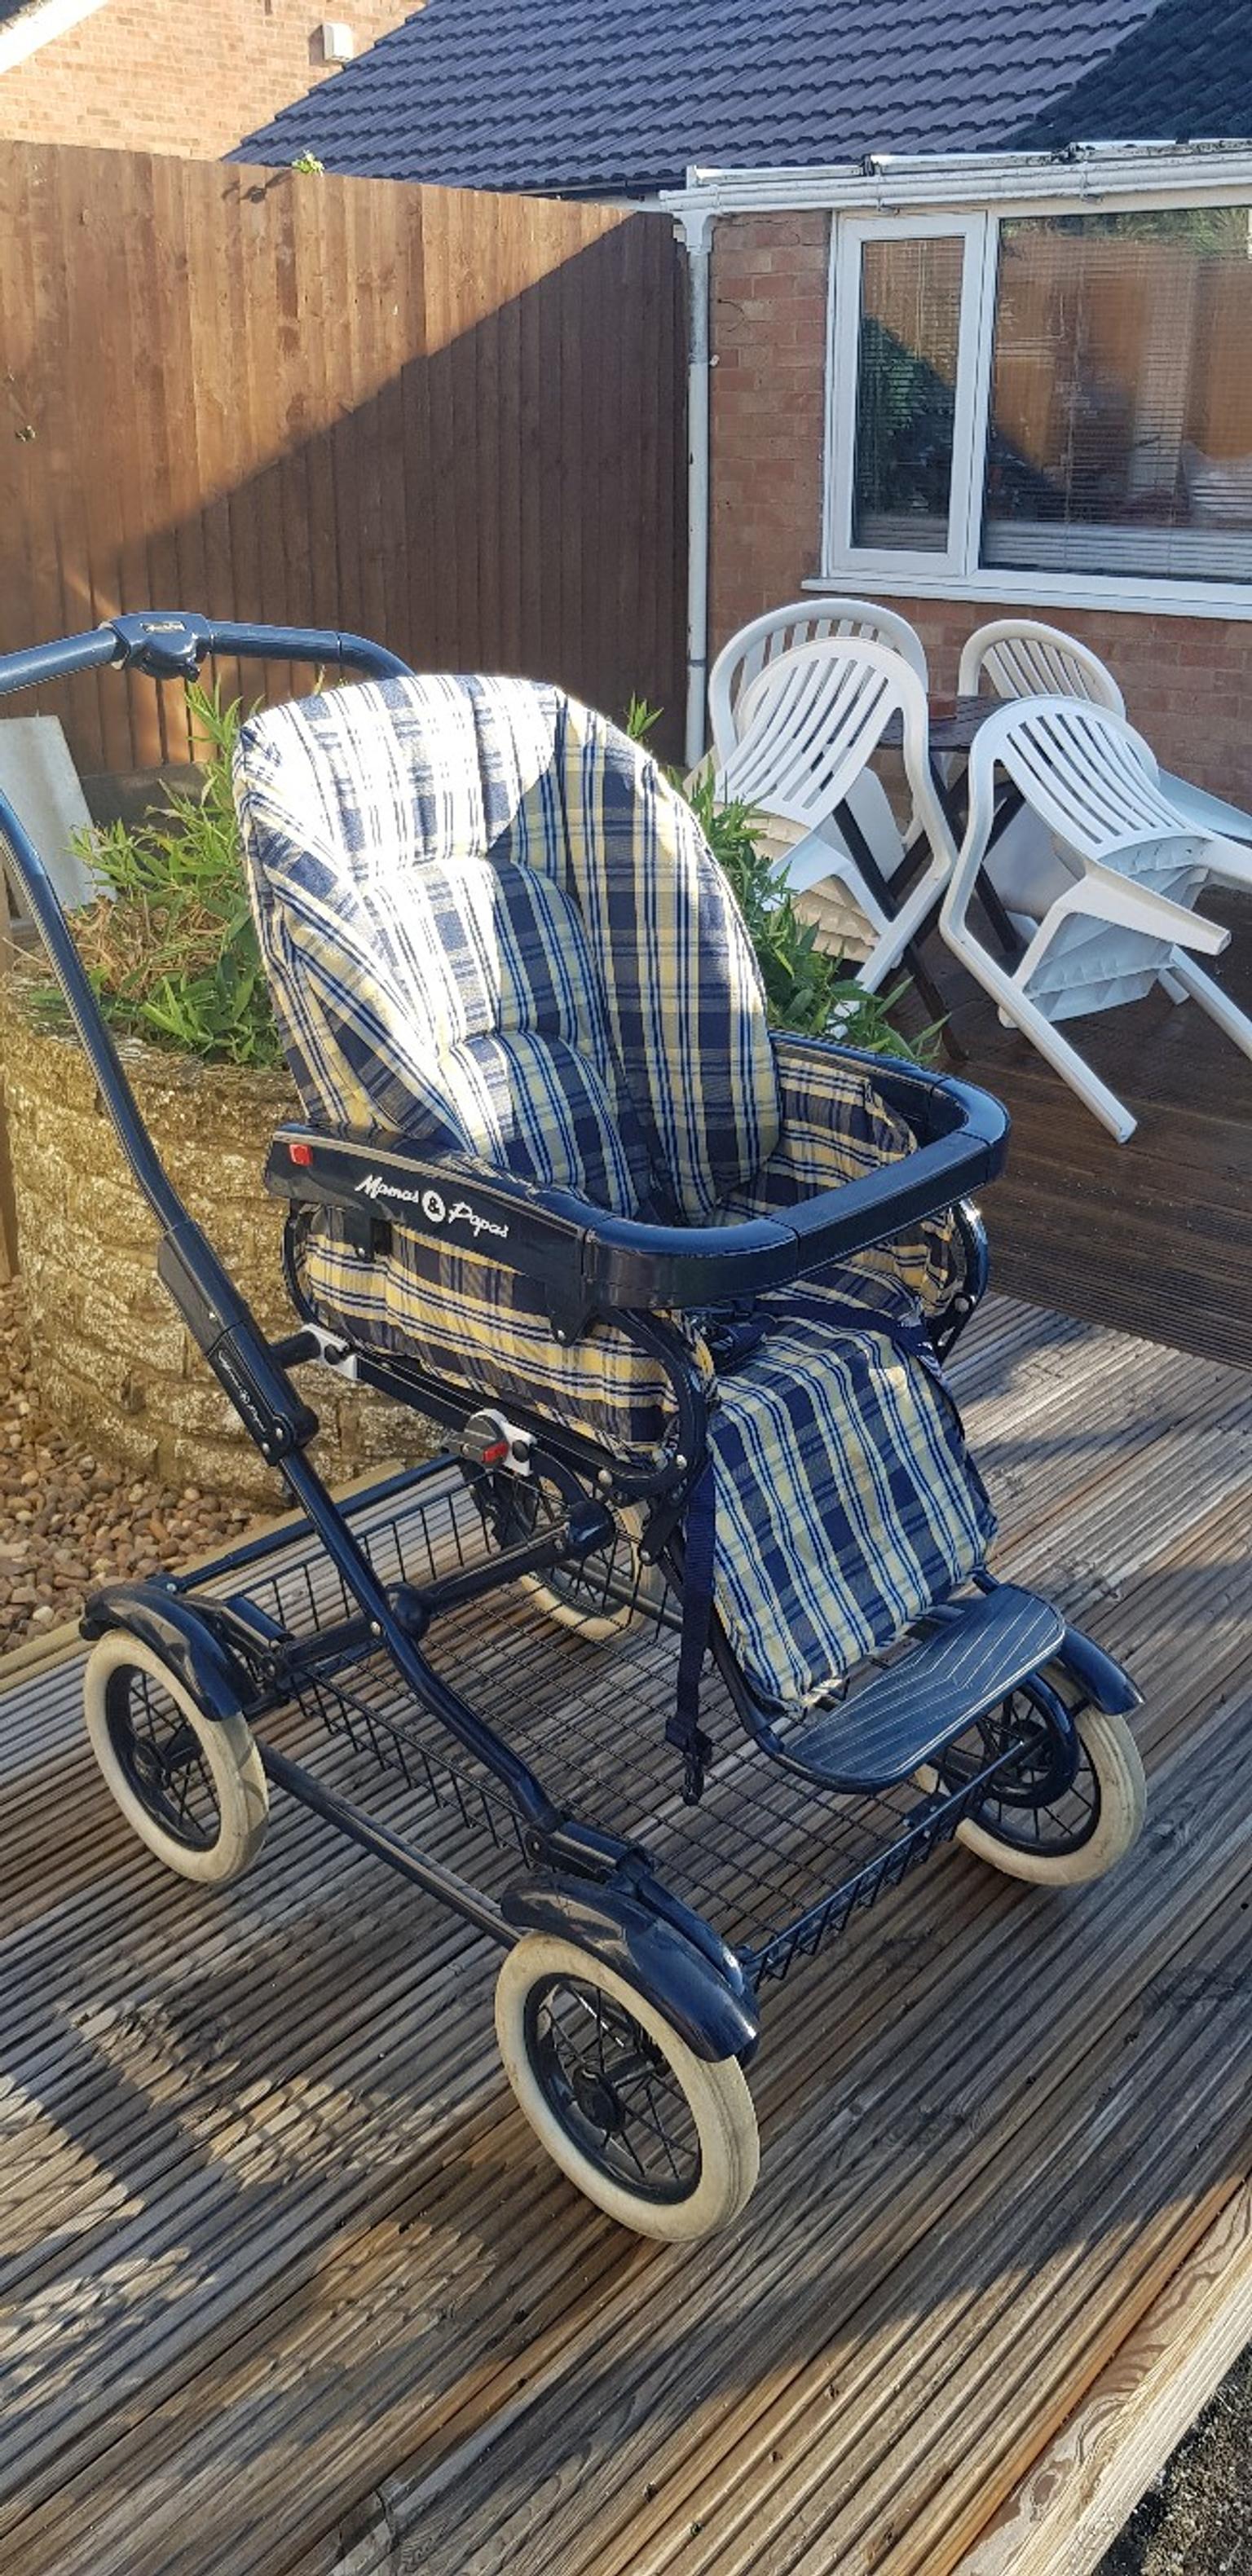 mamma and pappa pushchair